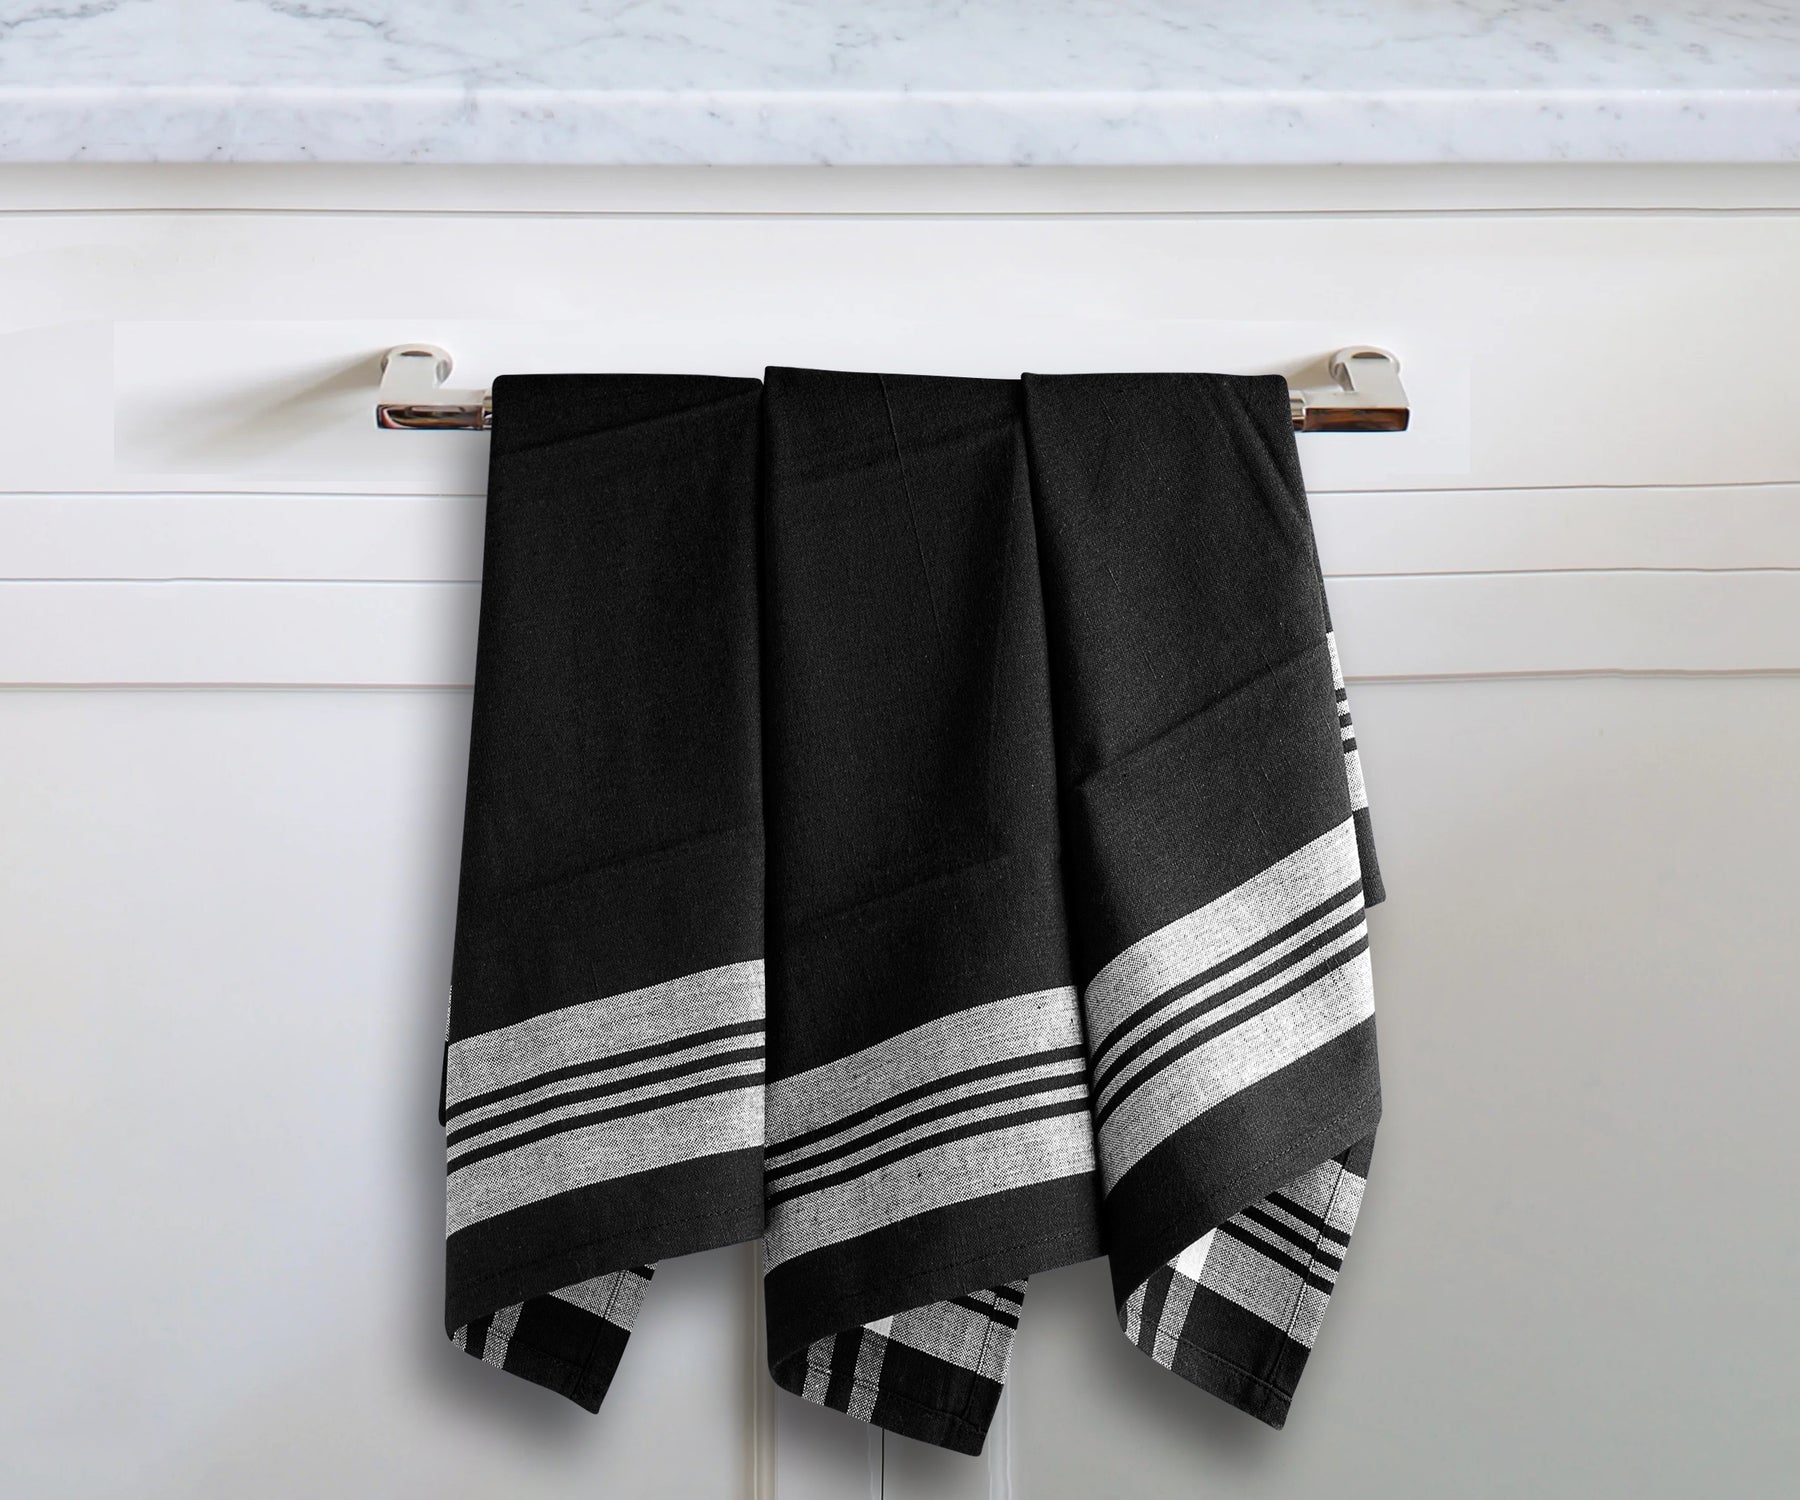 Farmhouse kitchen towel with black and white stripes hanging on a metal hook